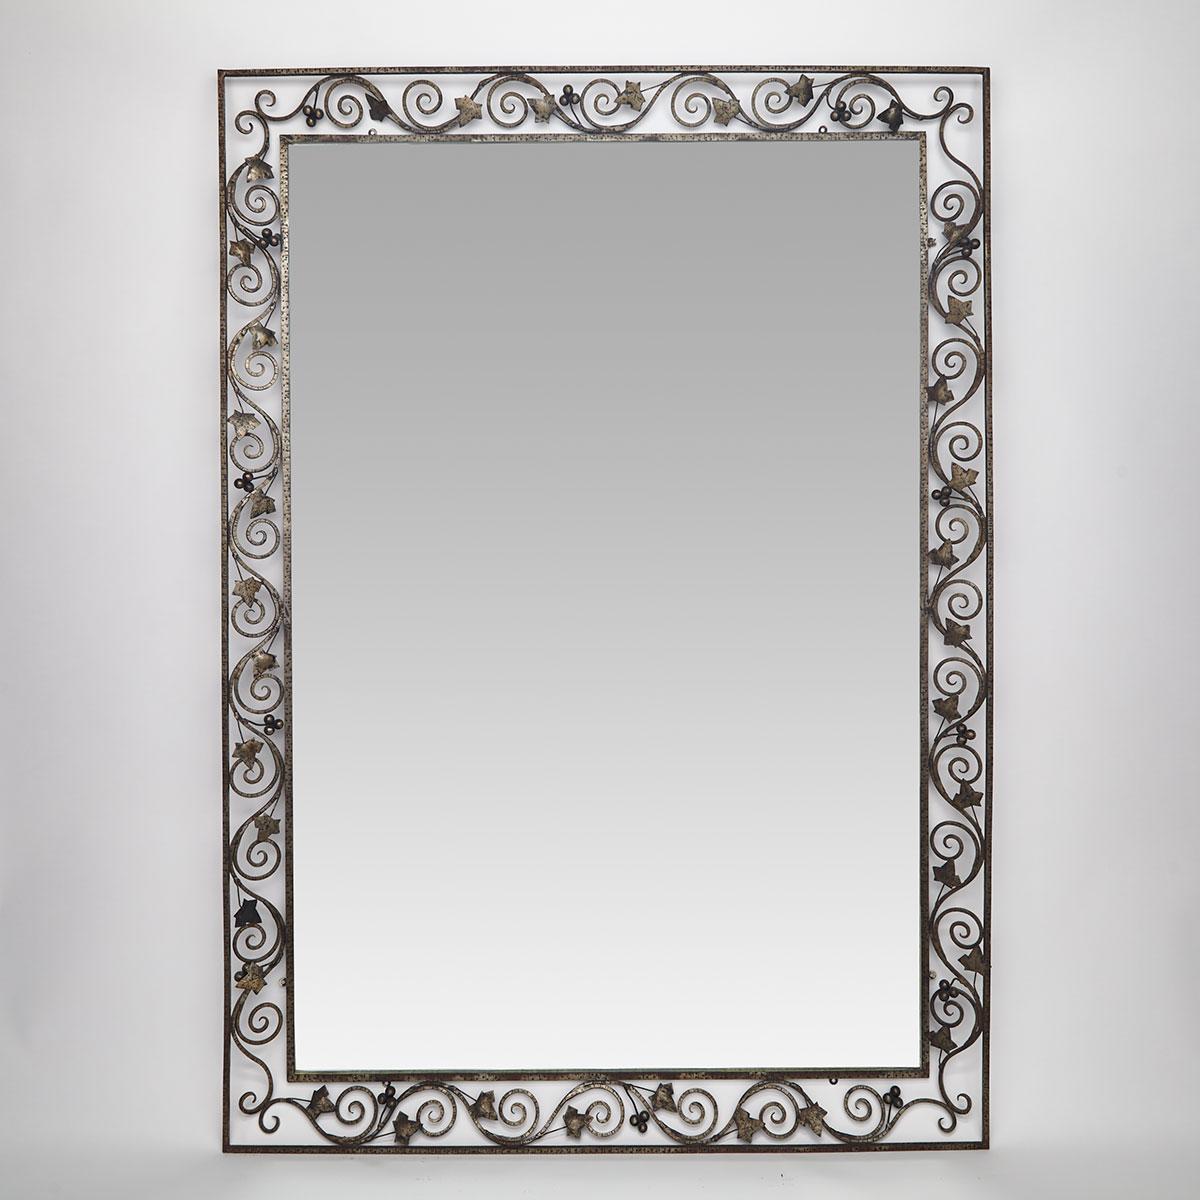 Large Wrought Iron Mirror, early-mid 20th century